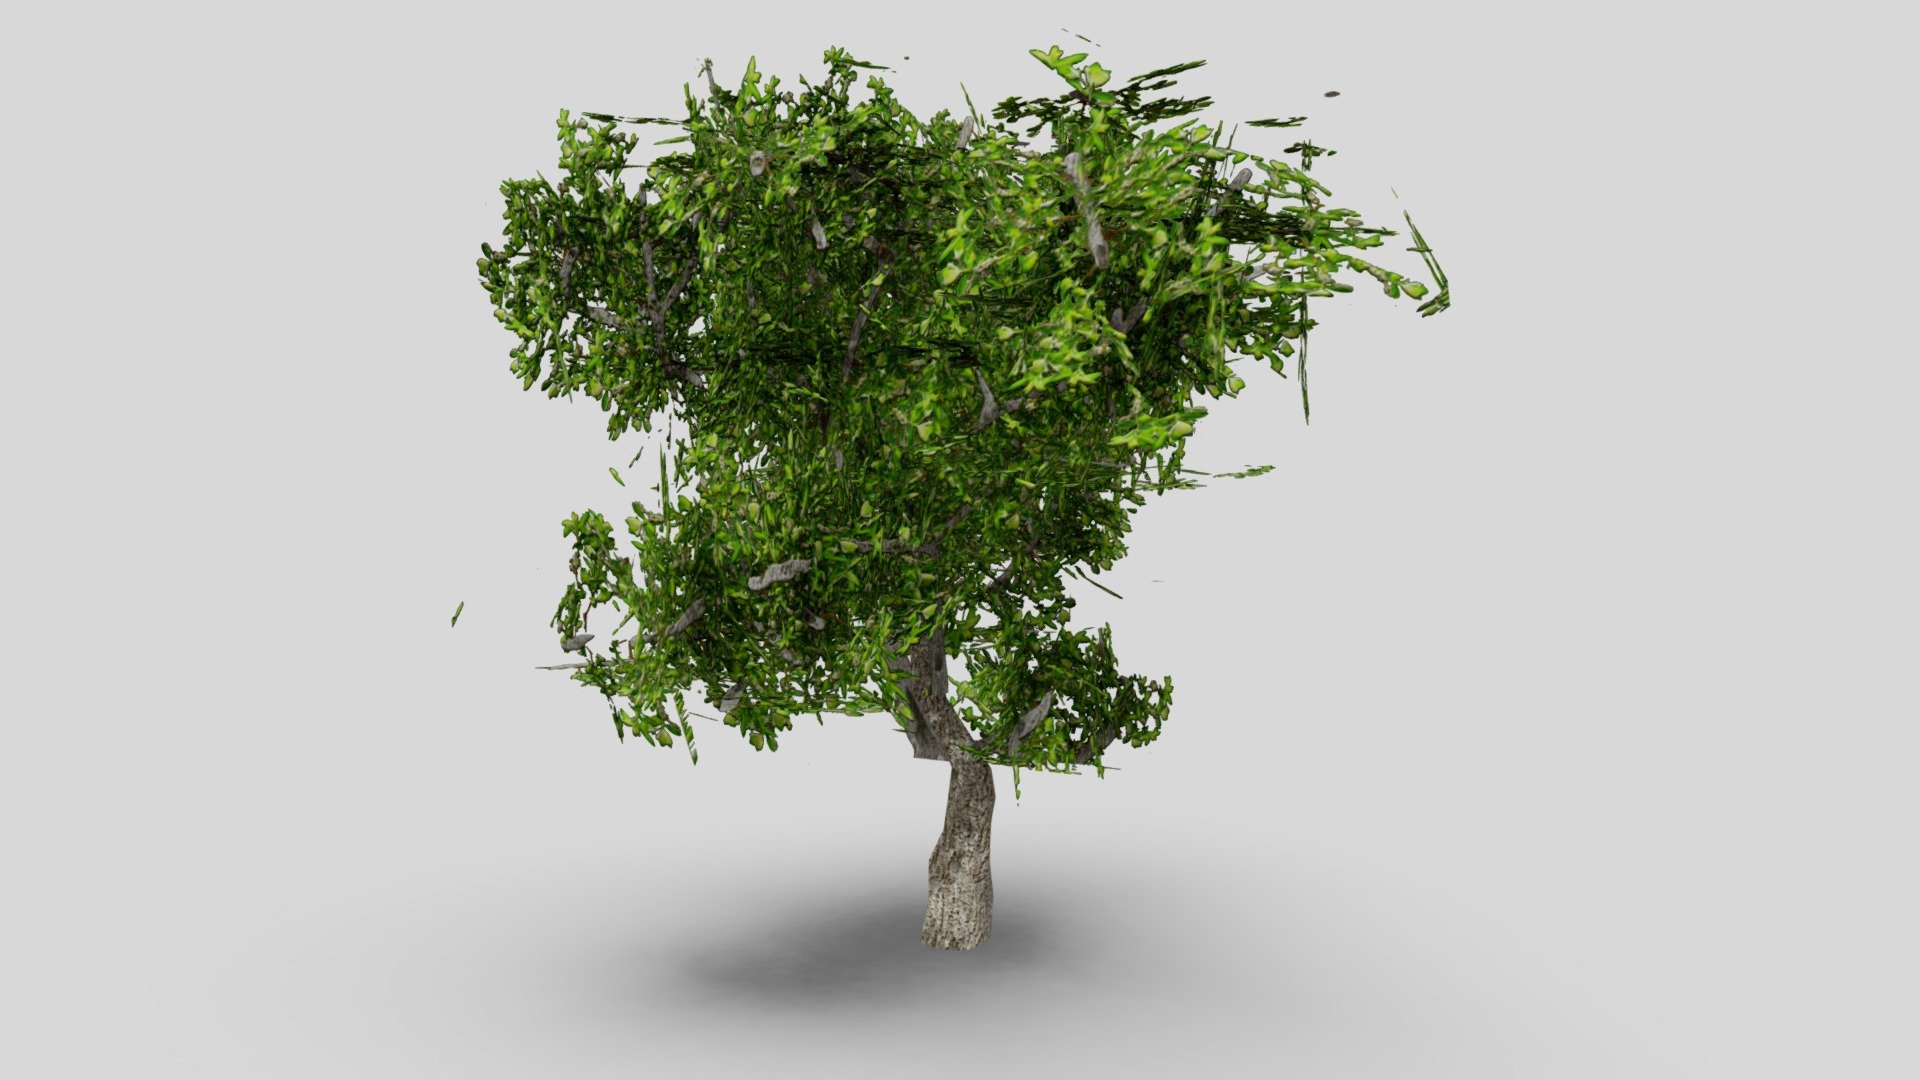 Lowpoly 3D Tree (107 faces)